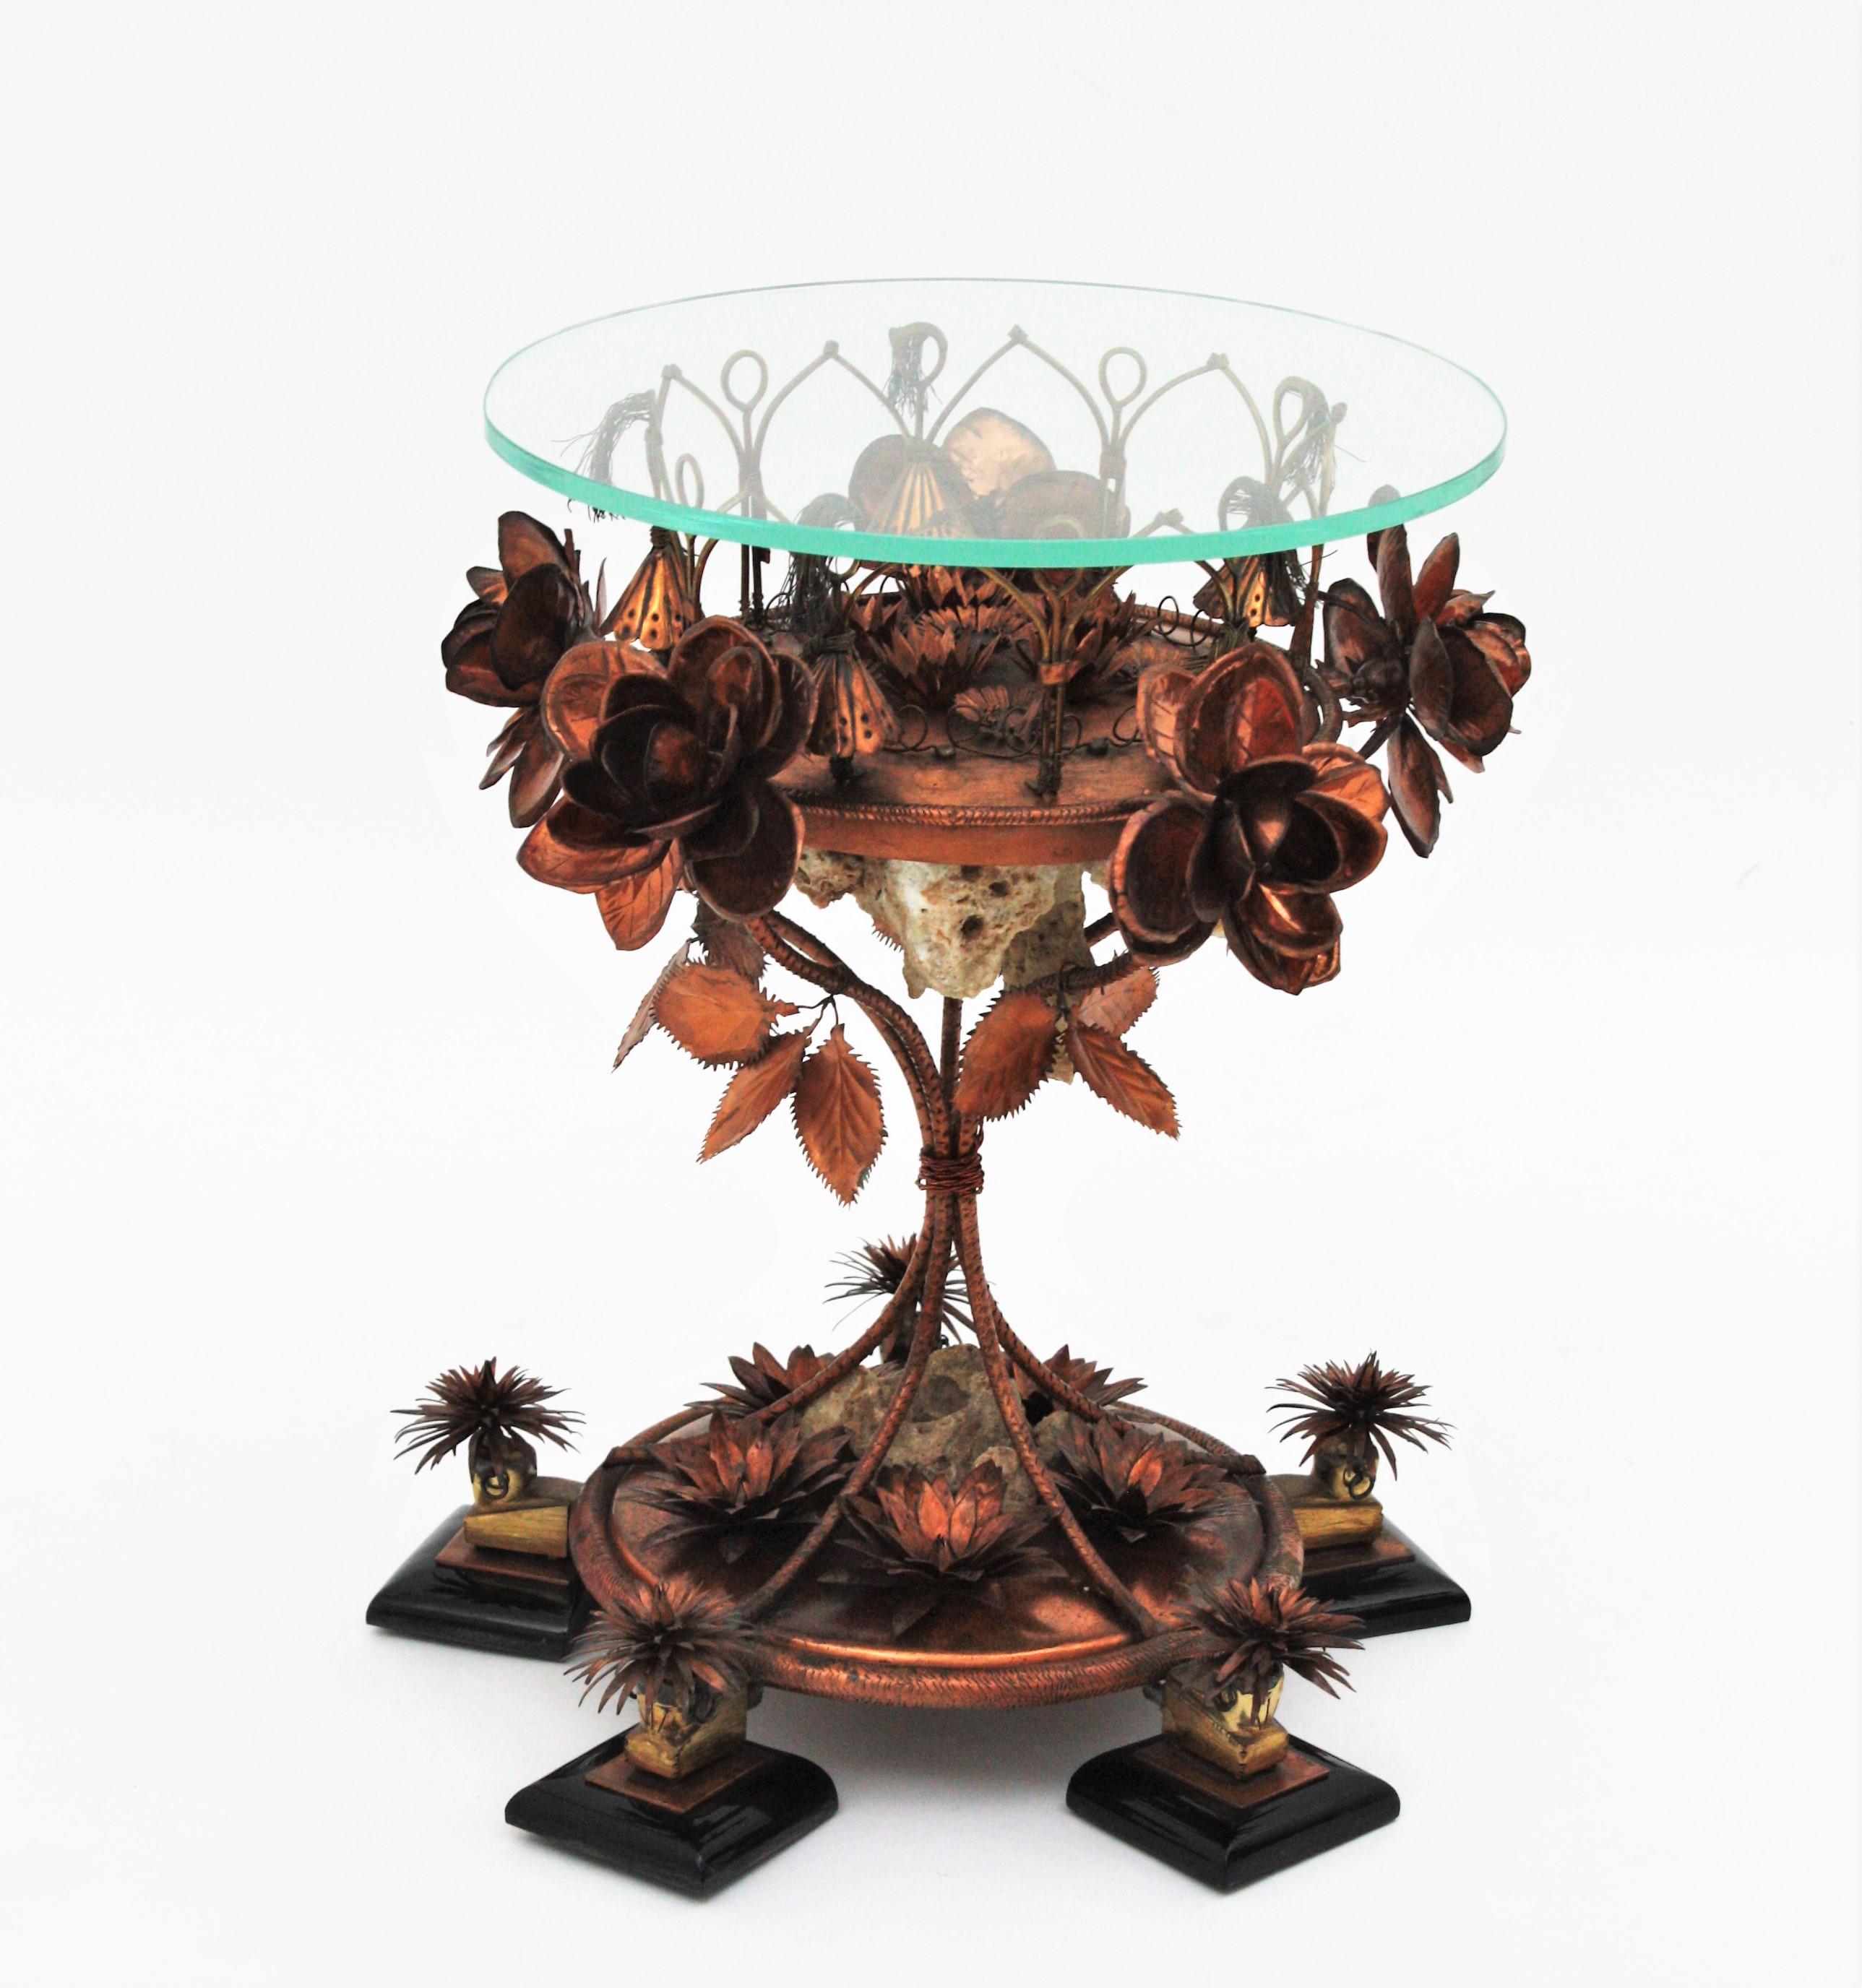 One of a kind handcrafted small table in copper, stone and glass depicting the Sardana dance. Spain, 1950s-1960s.
This outstanding table was entirely made by hand (Please see in the detail the Master's meticulous work)
It has a gorgeous foliage